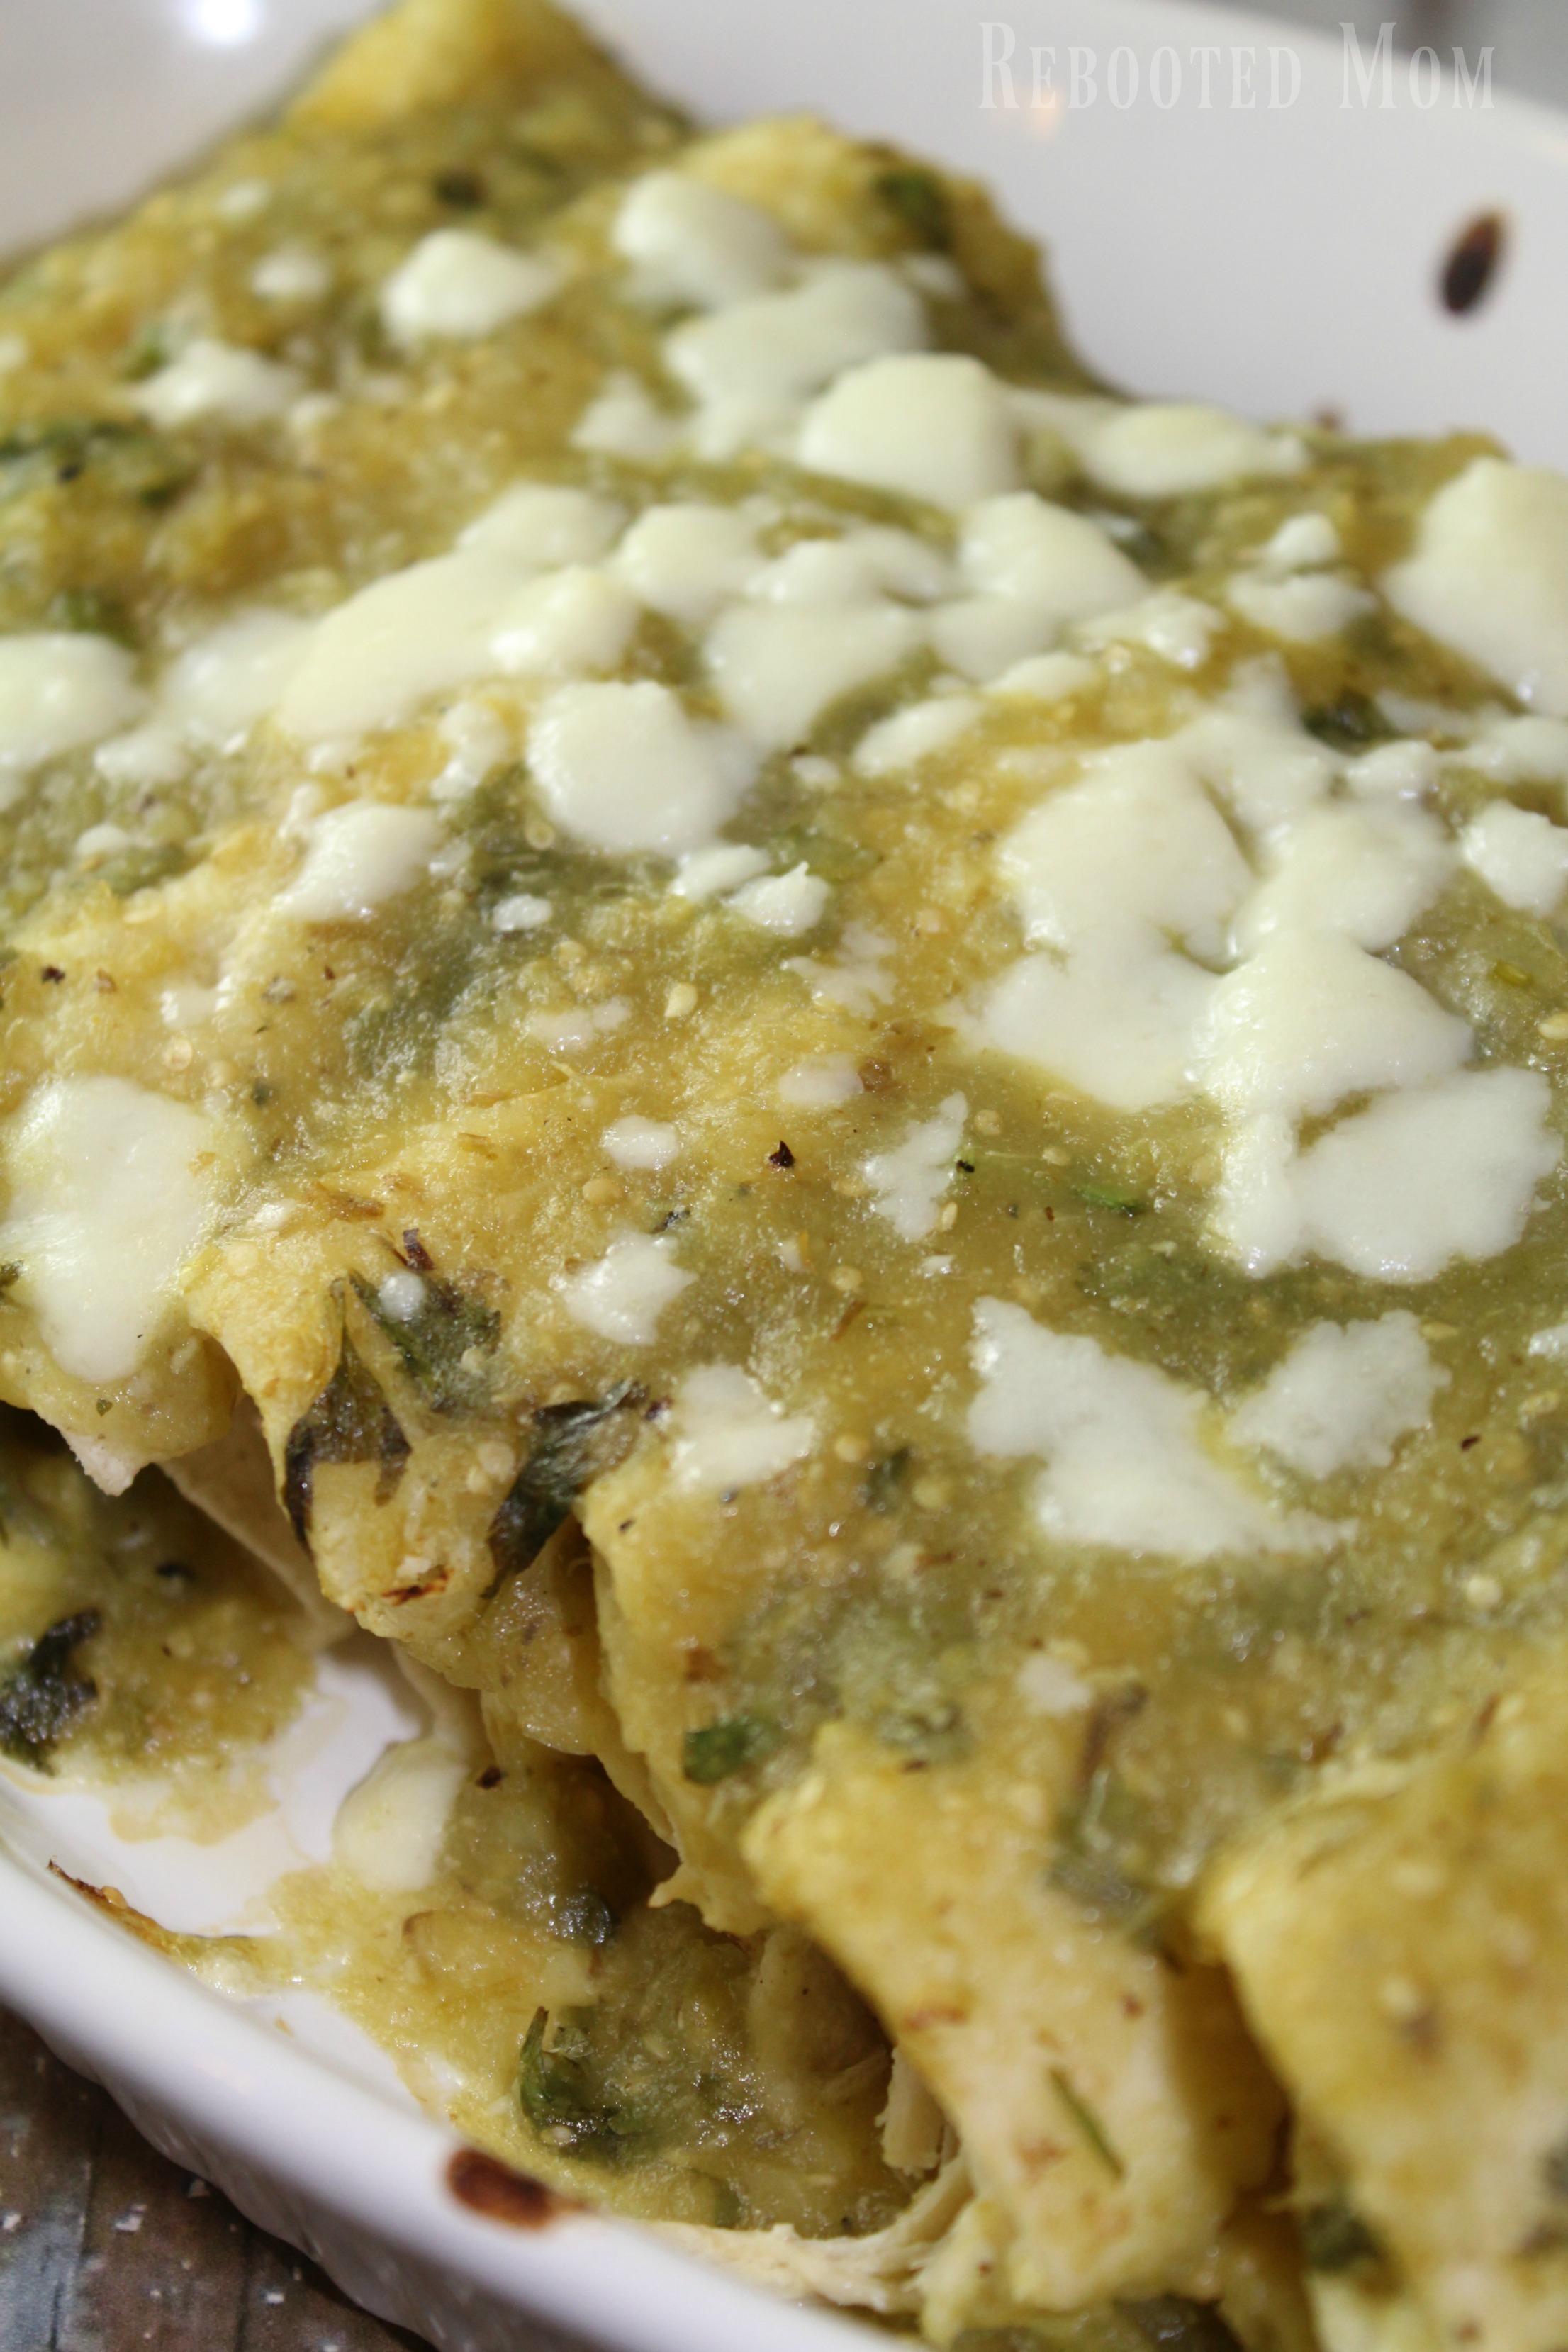 These roasted tomatillo enchiladas combine chicken enchiladas with fresh tomatillos, serrano chiles, garlic and onion blended to create a rich, green sauce that'll be your new weeknight go-to meal.